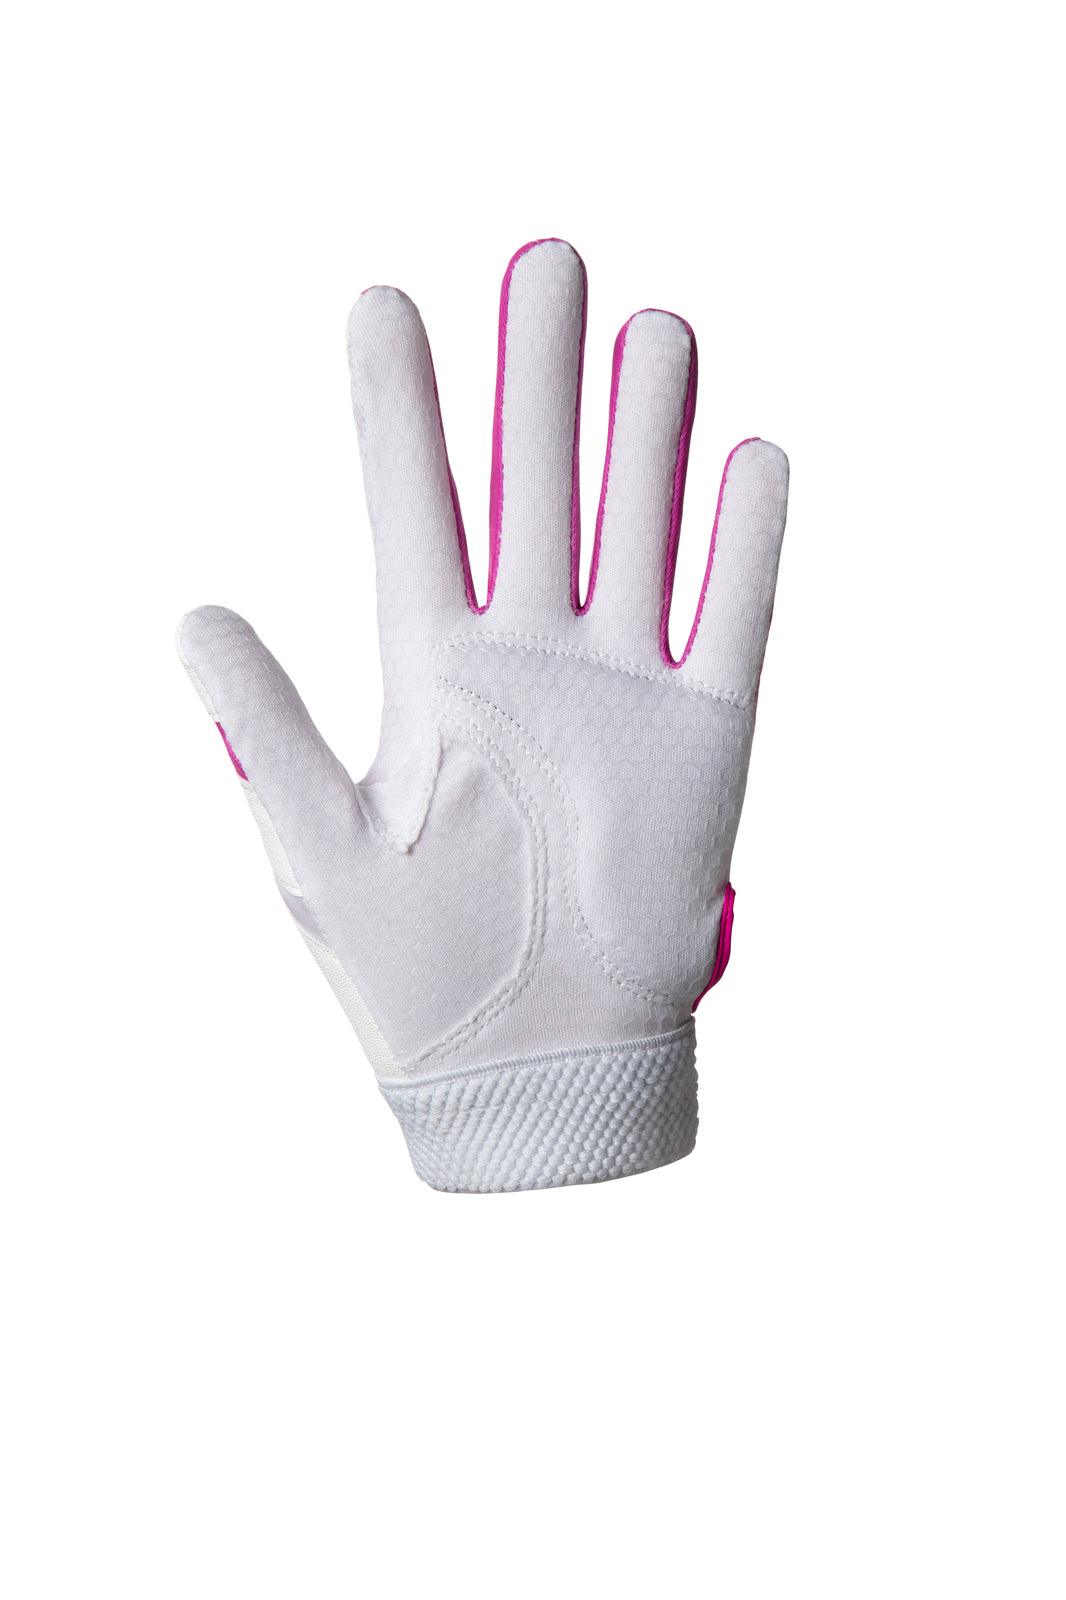 Finch Youth Softball Batting Glove - Sports Excellence